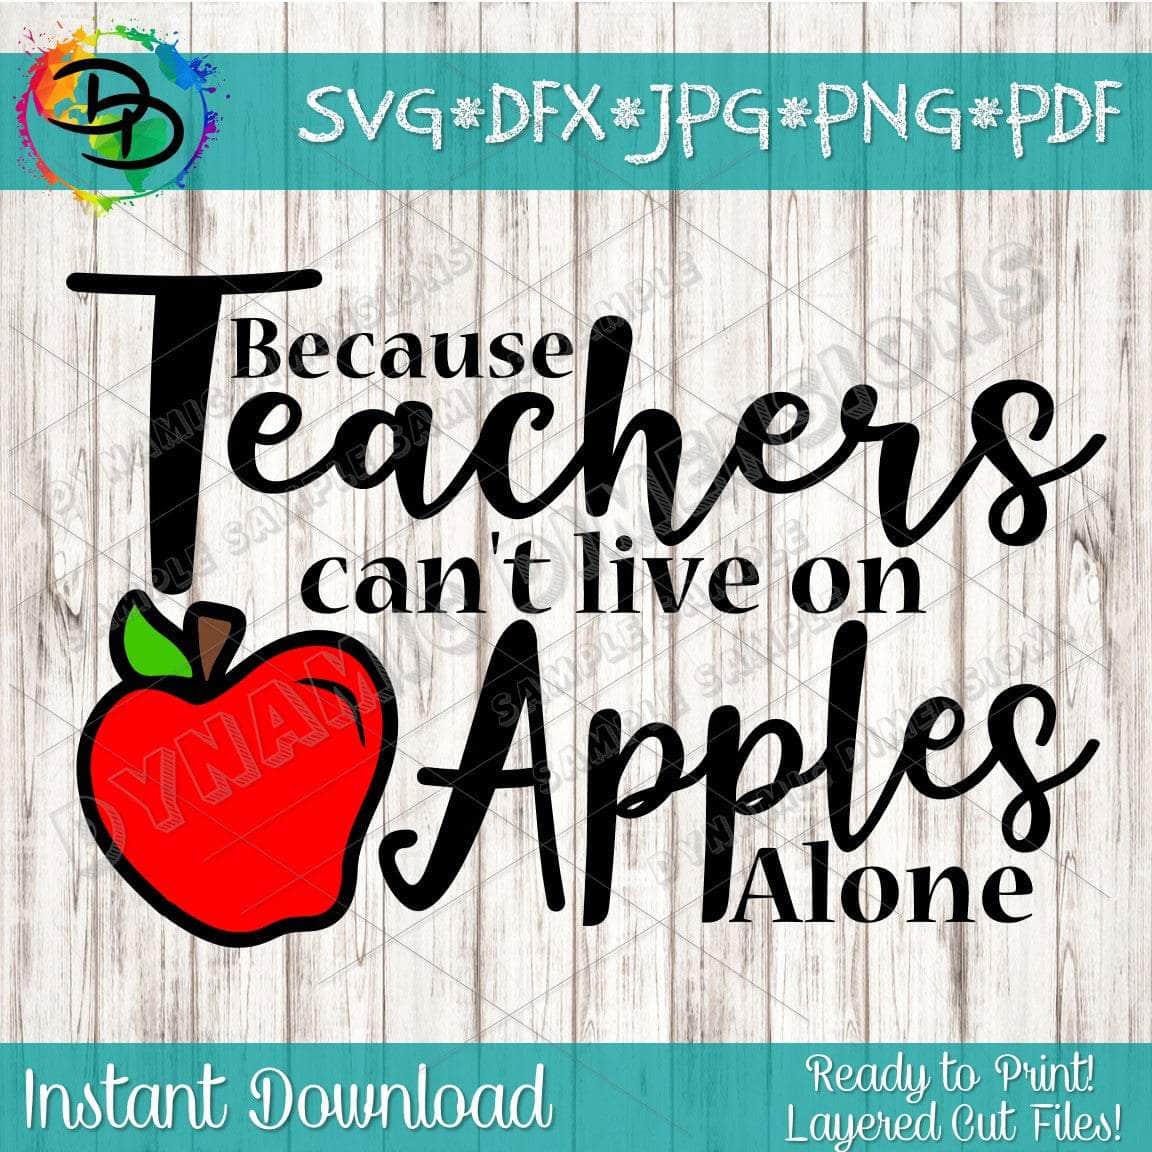 Teacher cant live on apples alone